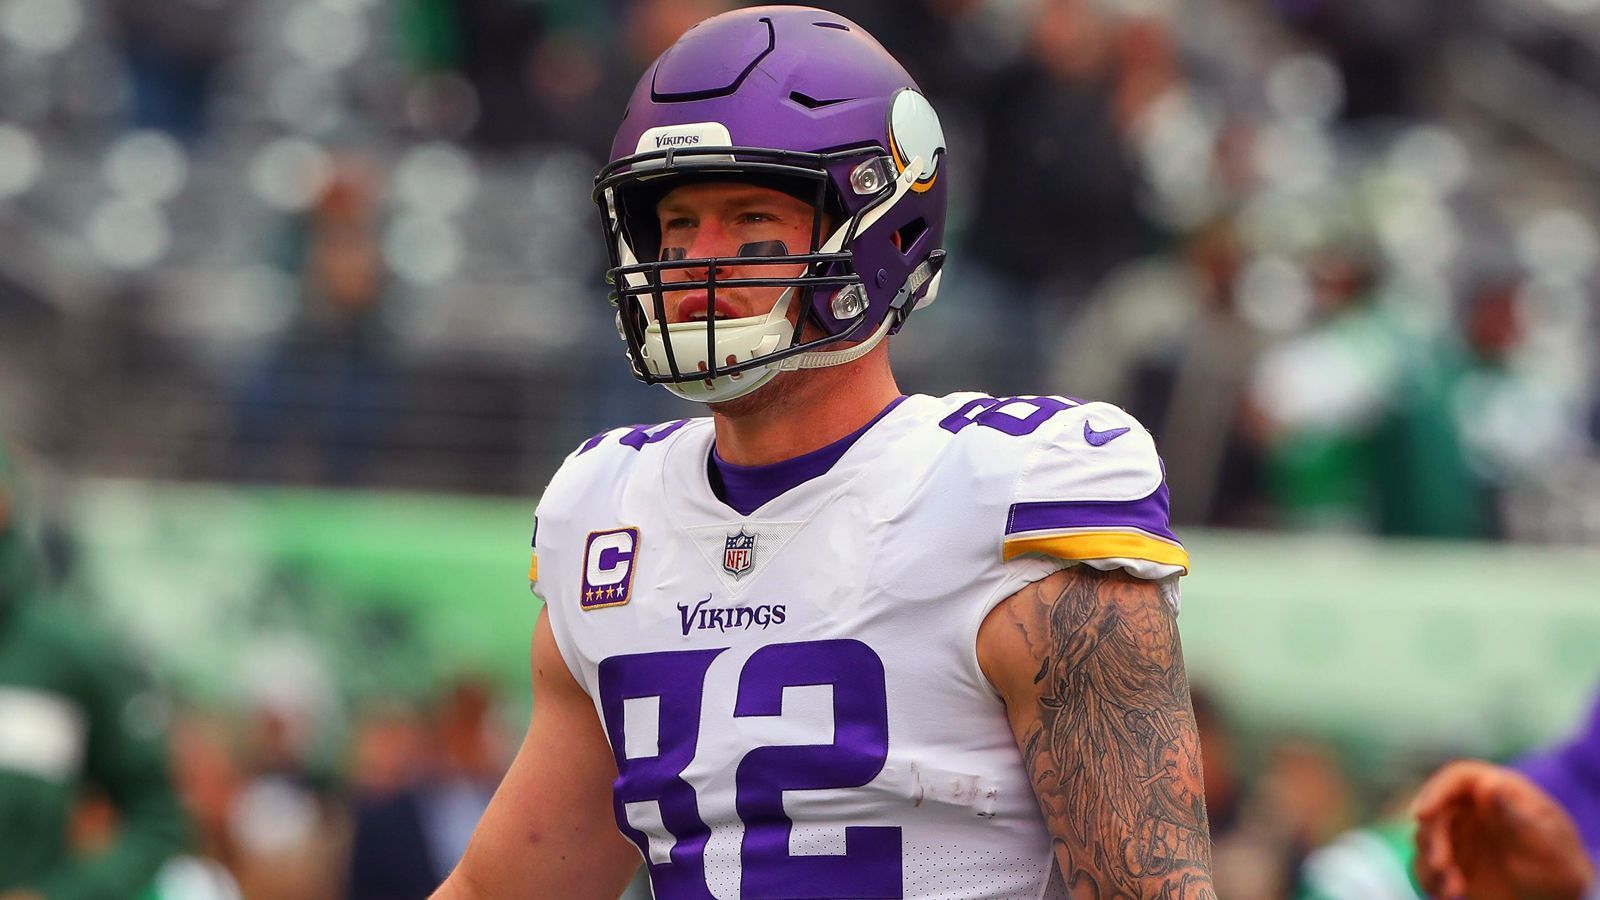 
                <strong>Minnesota Vikings: Kyle Rudolph</strong><br>
                Position: Tight End
              